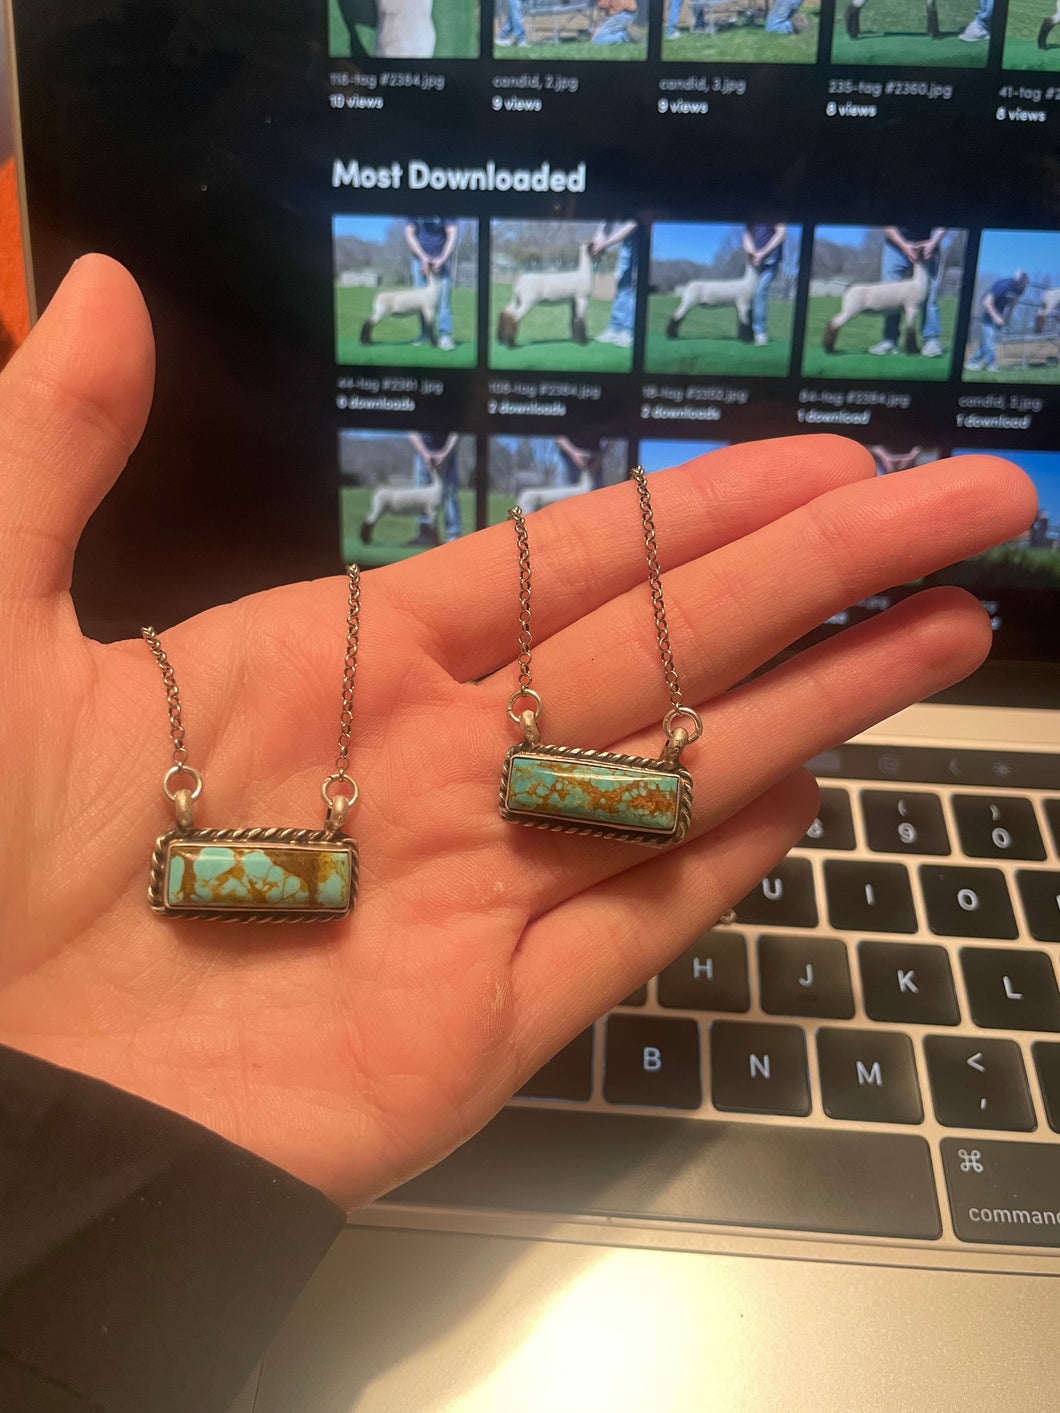 Turquoise Bar Necklaces